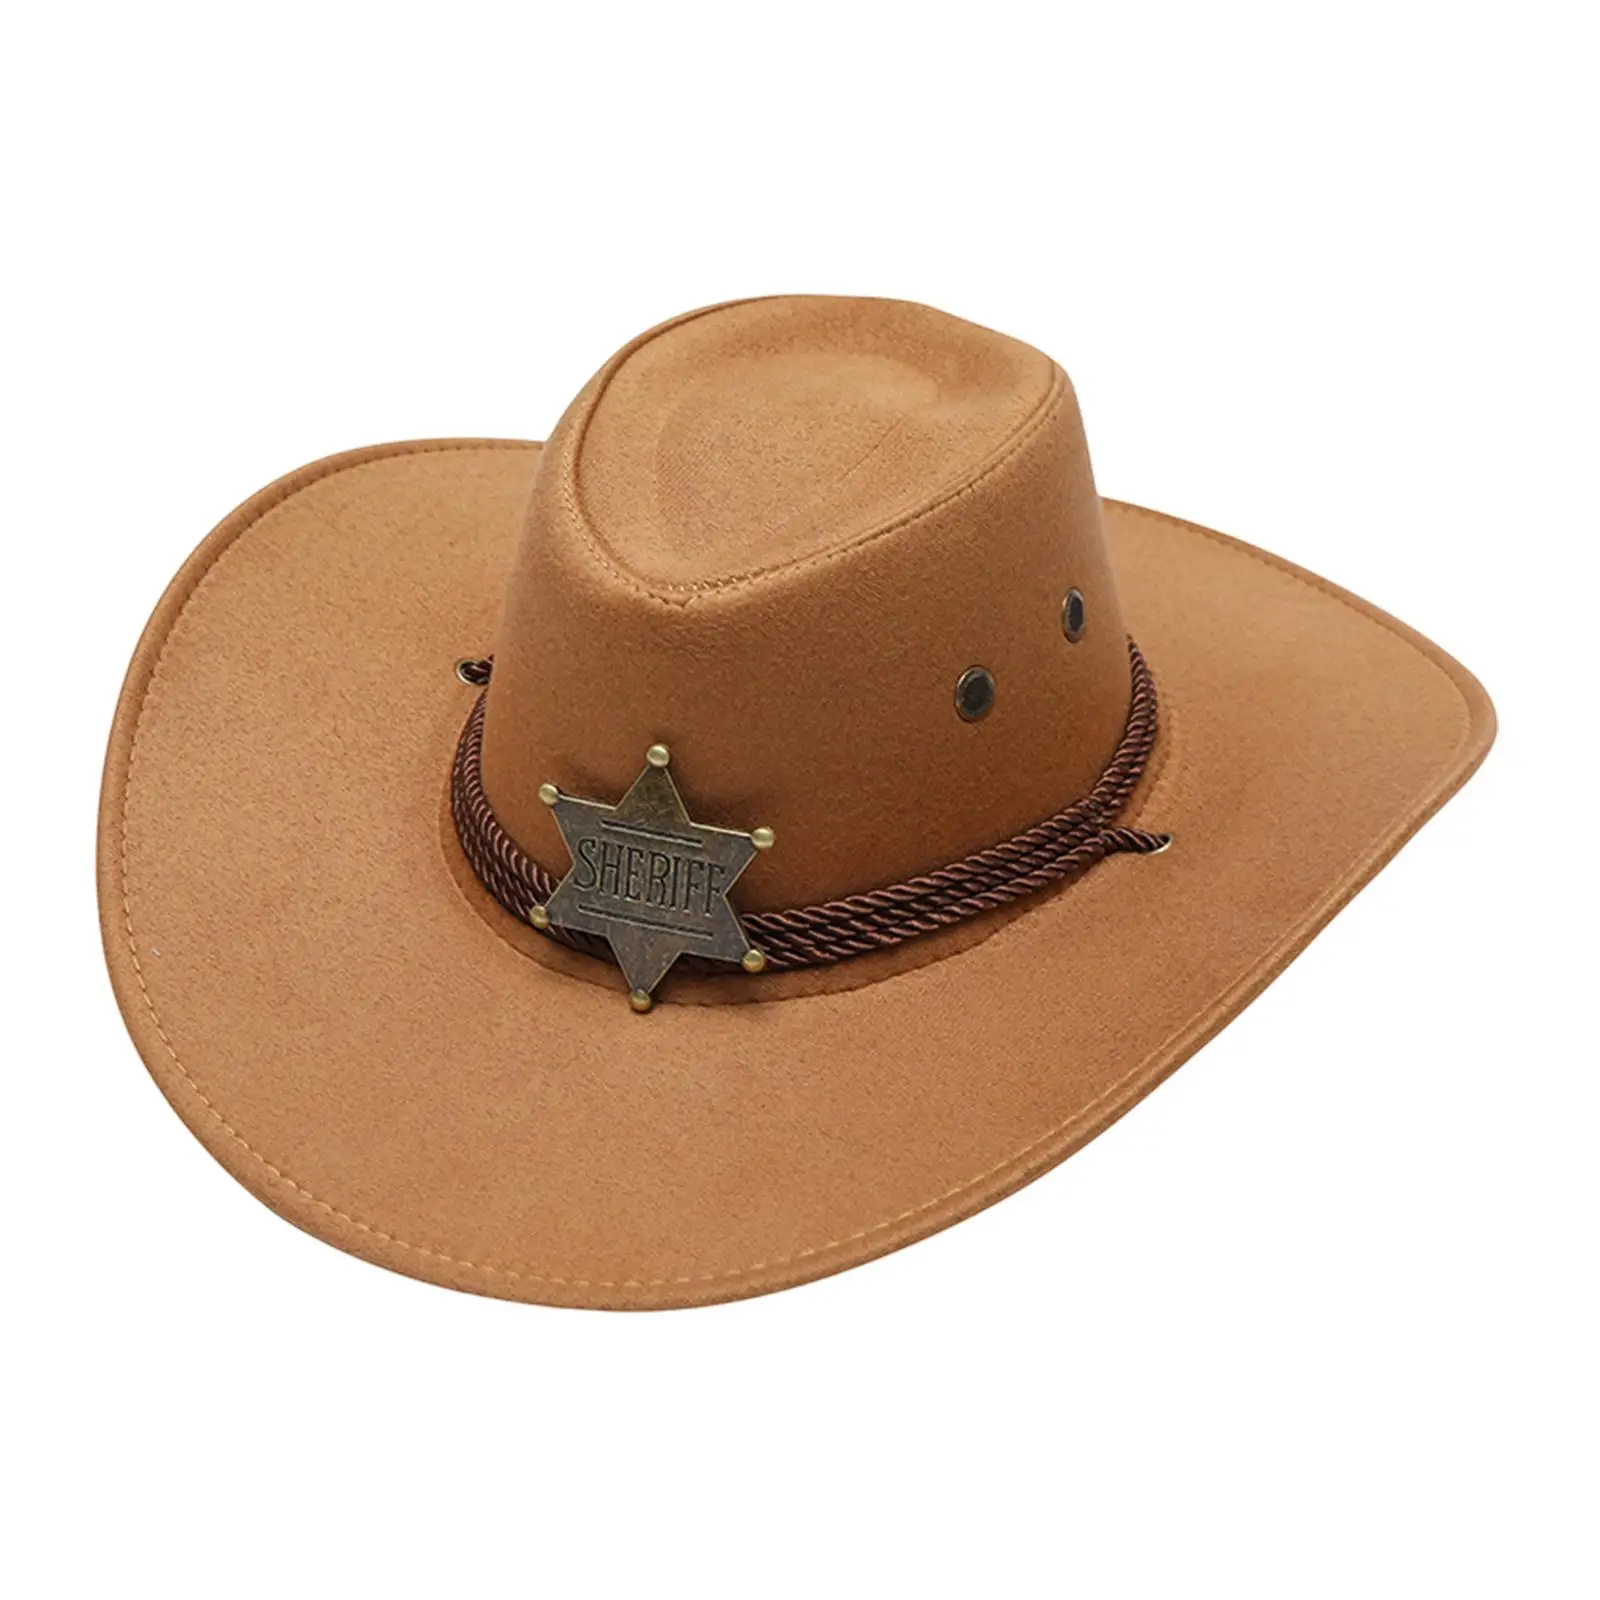 Western Cowboy Hat Men Outdoor Sunshade Hat for Carnival Travel Parties